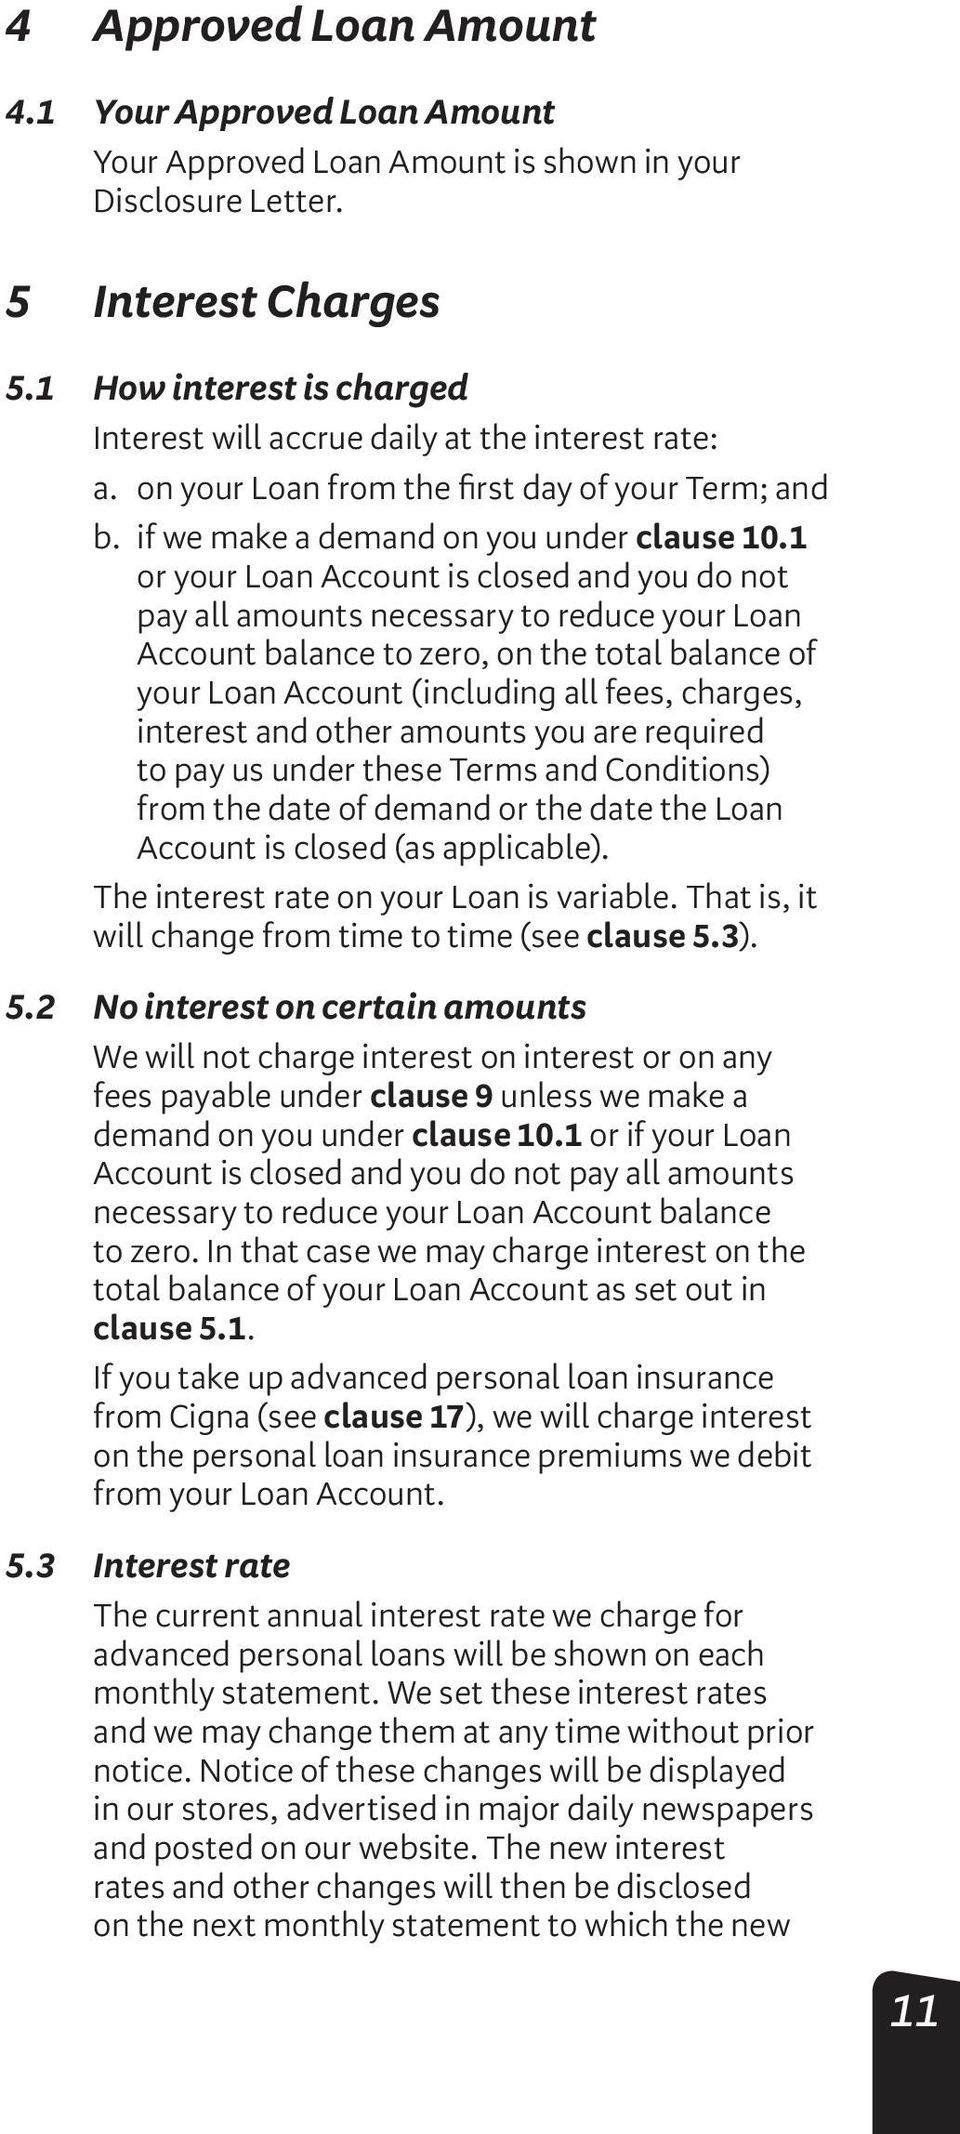 1 or your Loan Account is closed and you do not pay all amounts necessary to reduce your Loan Account balance to zero, on the total balance of your Loan Account (including all fees, charges, interest